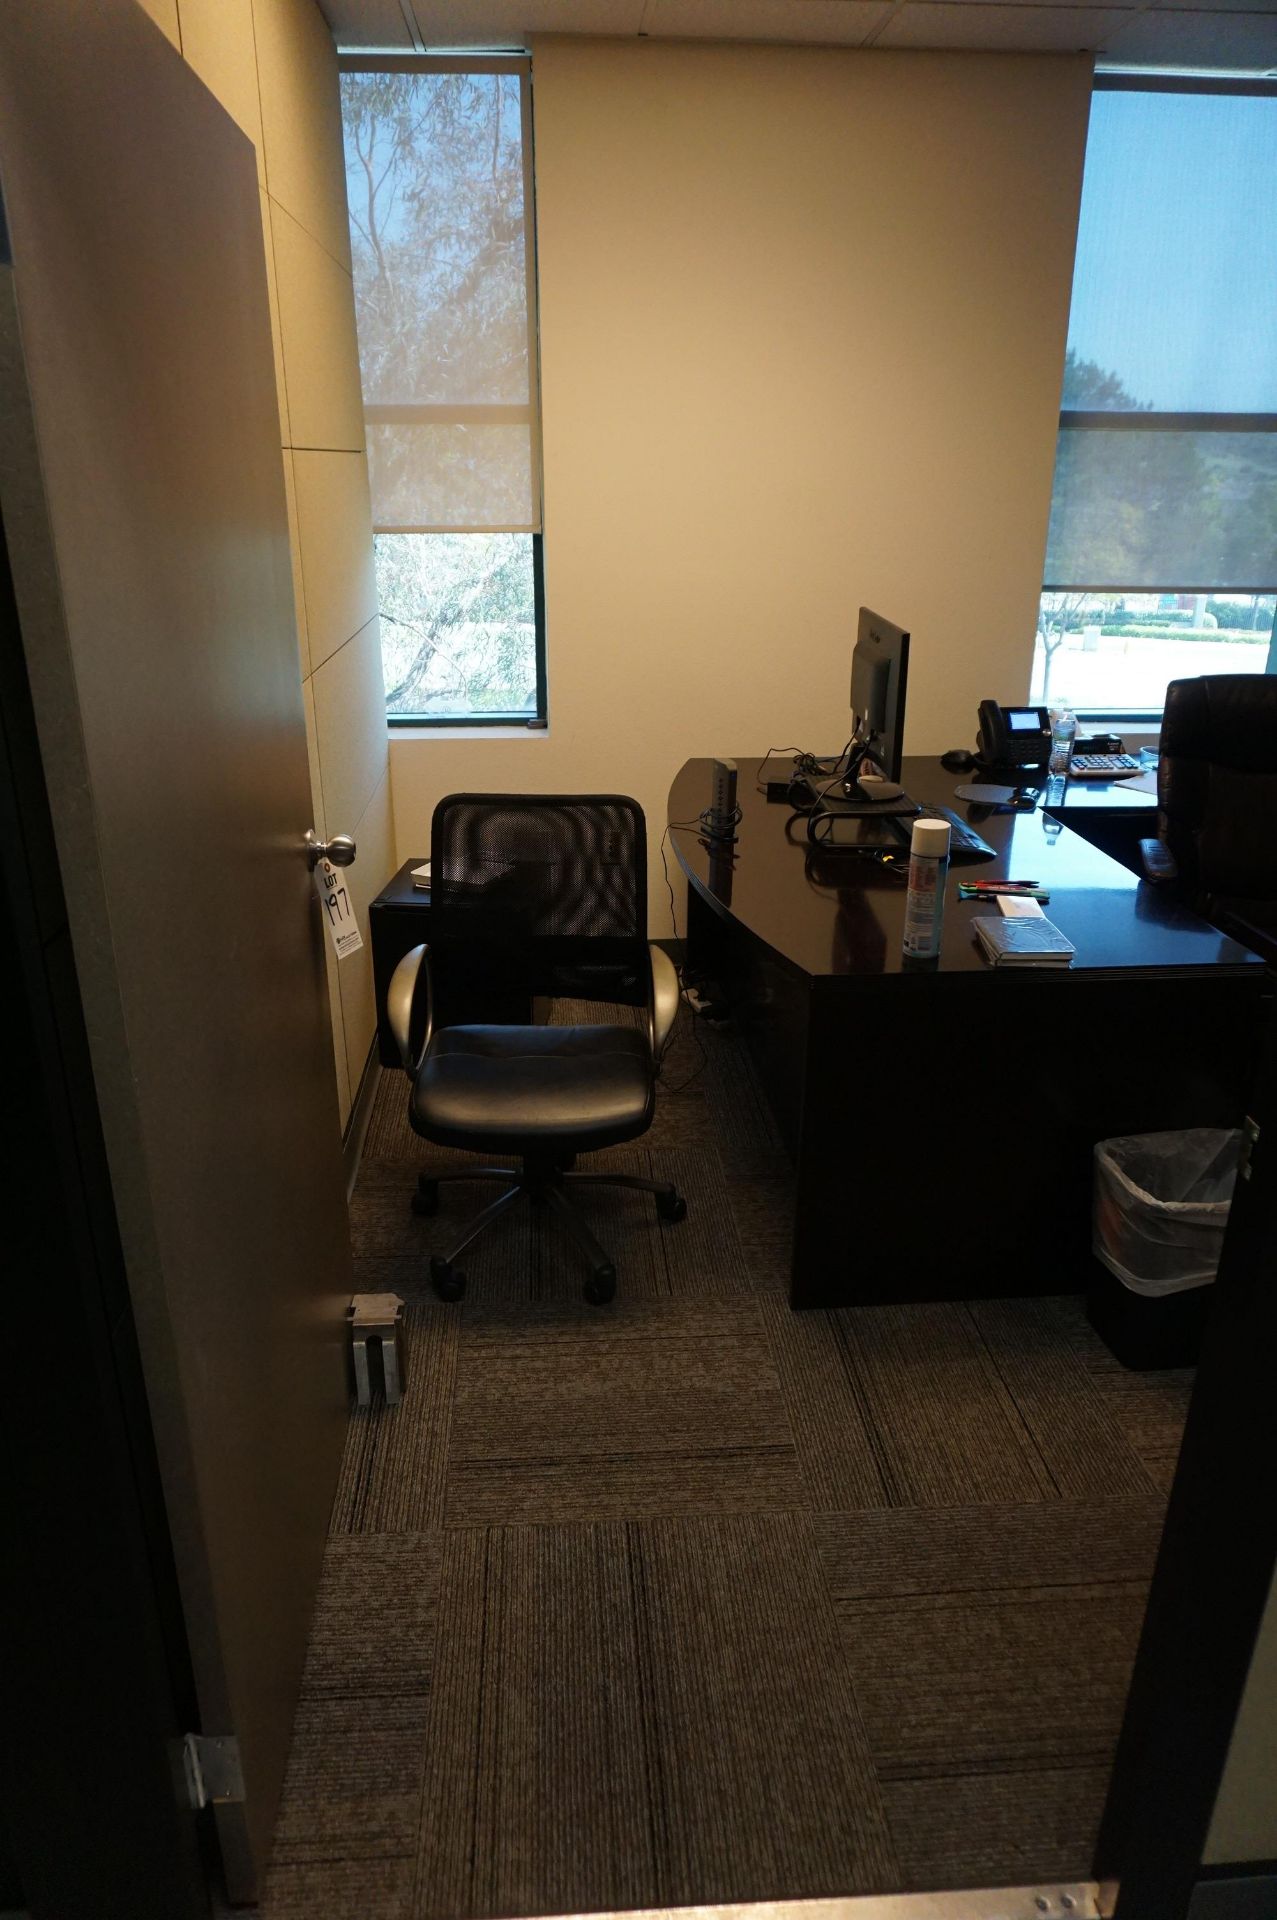 SECOND FLOOR OFFICE TO INCLUDE: HIGH END EXECUTIVE DESK, MONITOR AND STAND KEYBOARD, EXECUTIVE